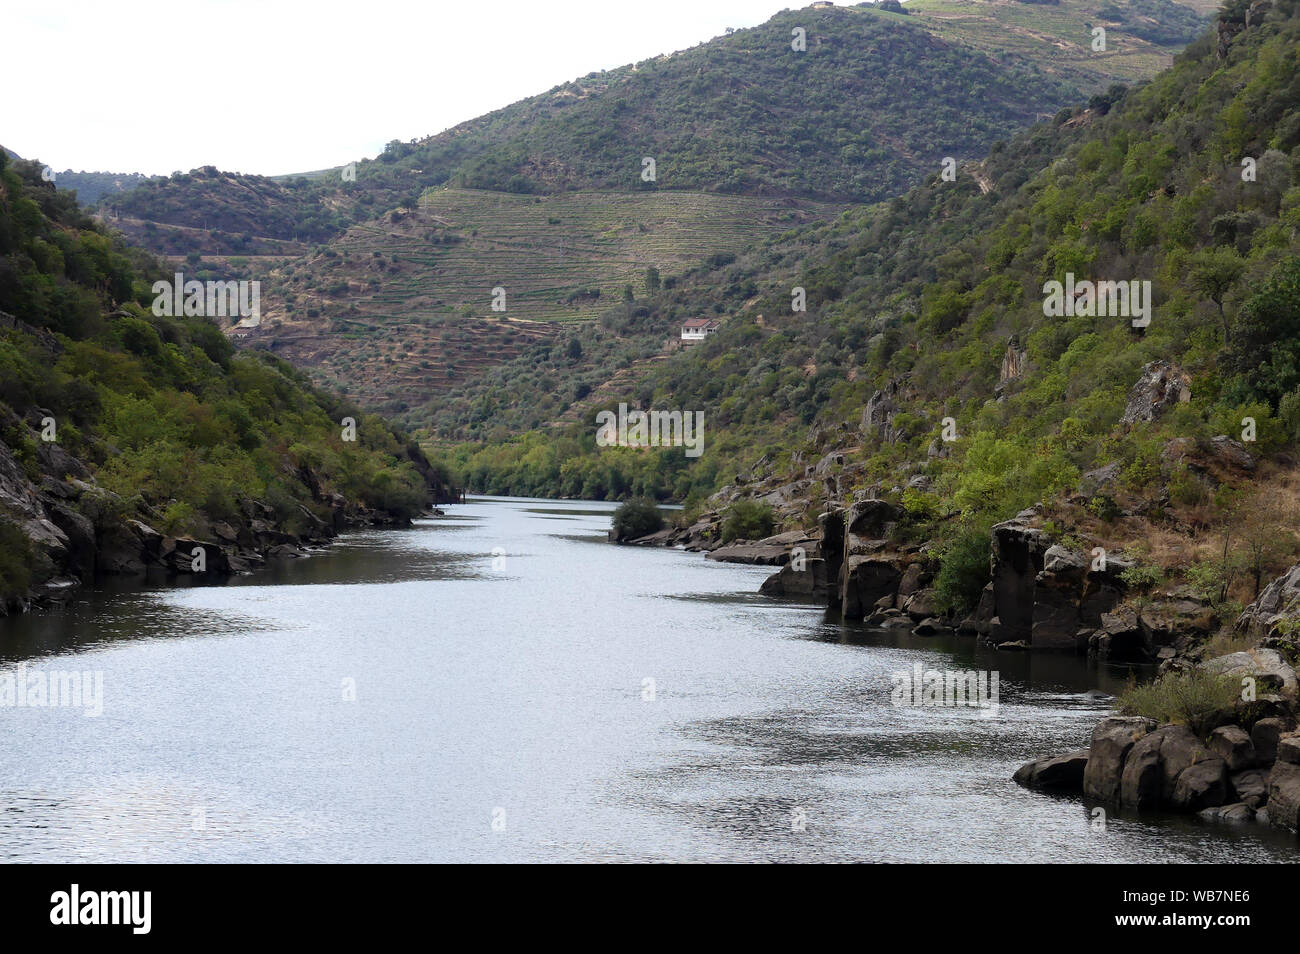 DOURO RIVER at the narrowest navigable section in Portugal. Photo: Tony Gale Stock Photo